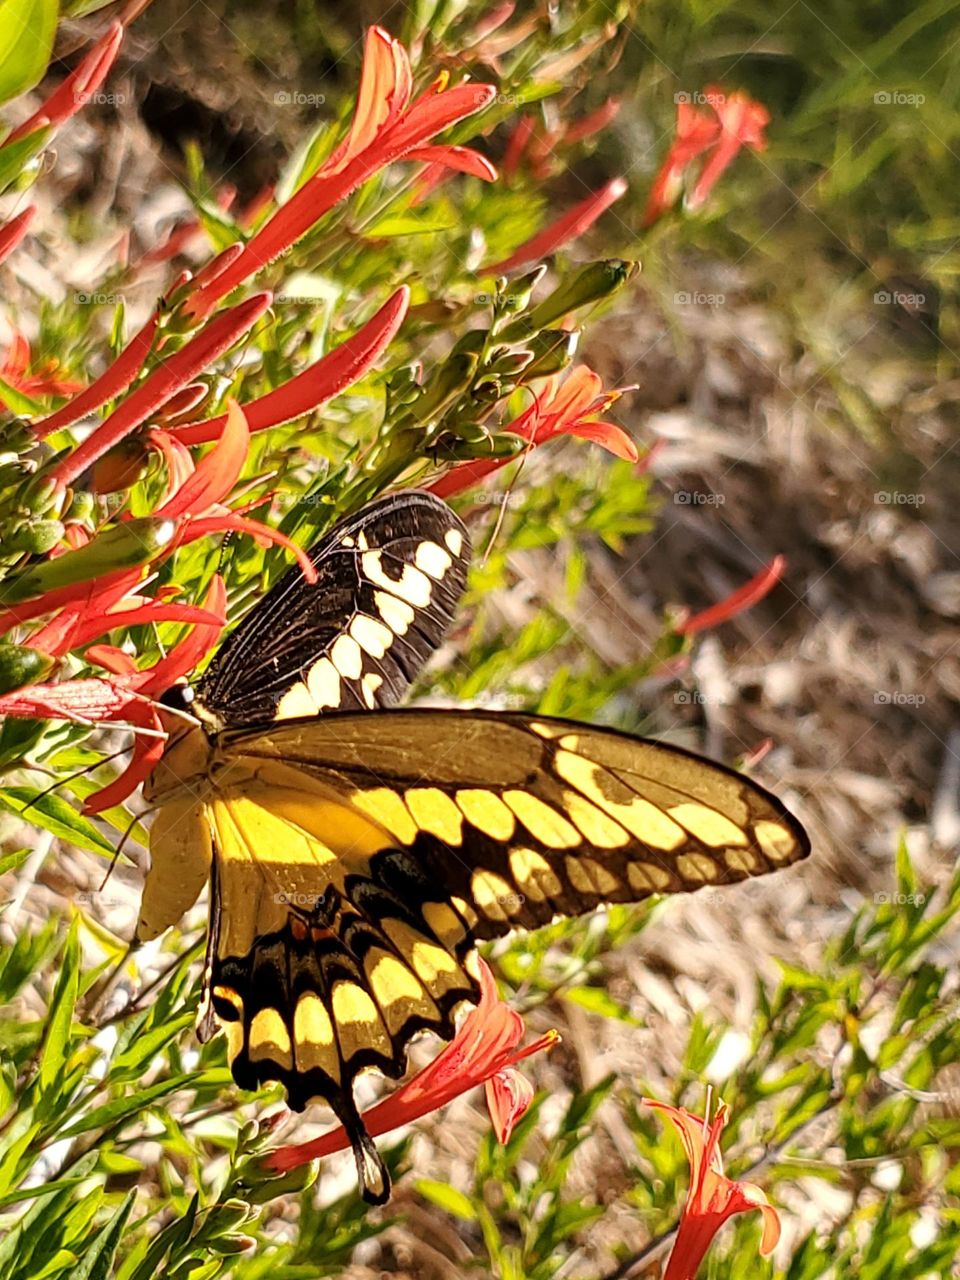 The Giant swallowtail butterfly.